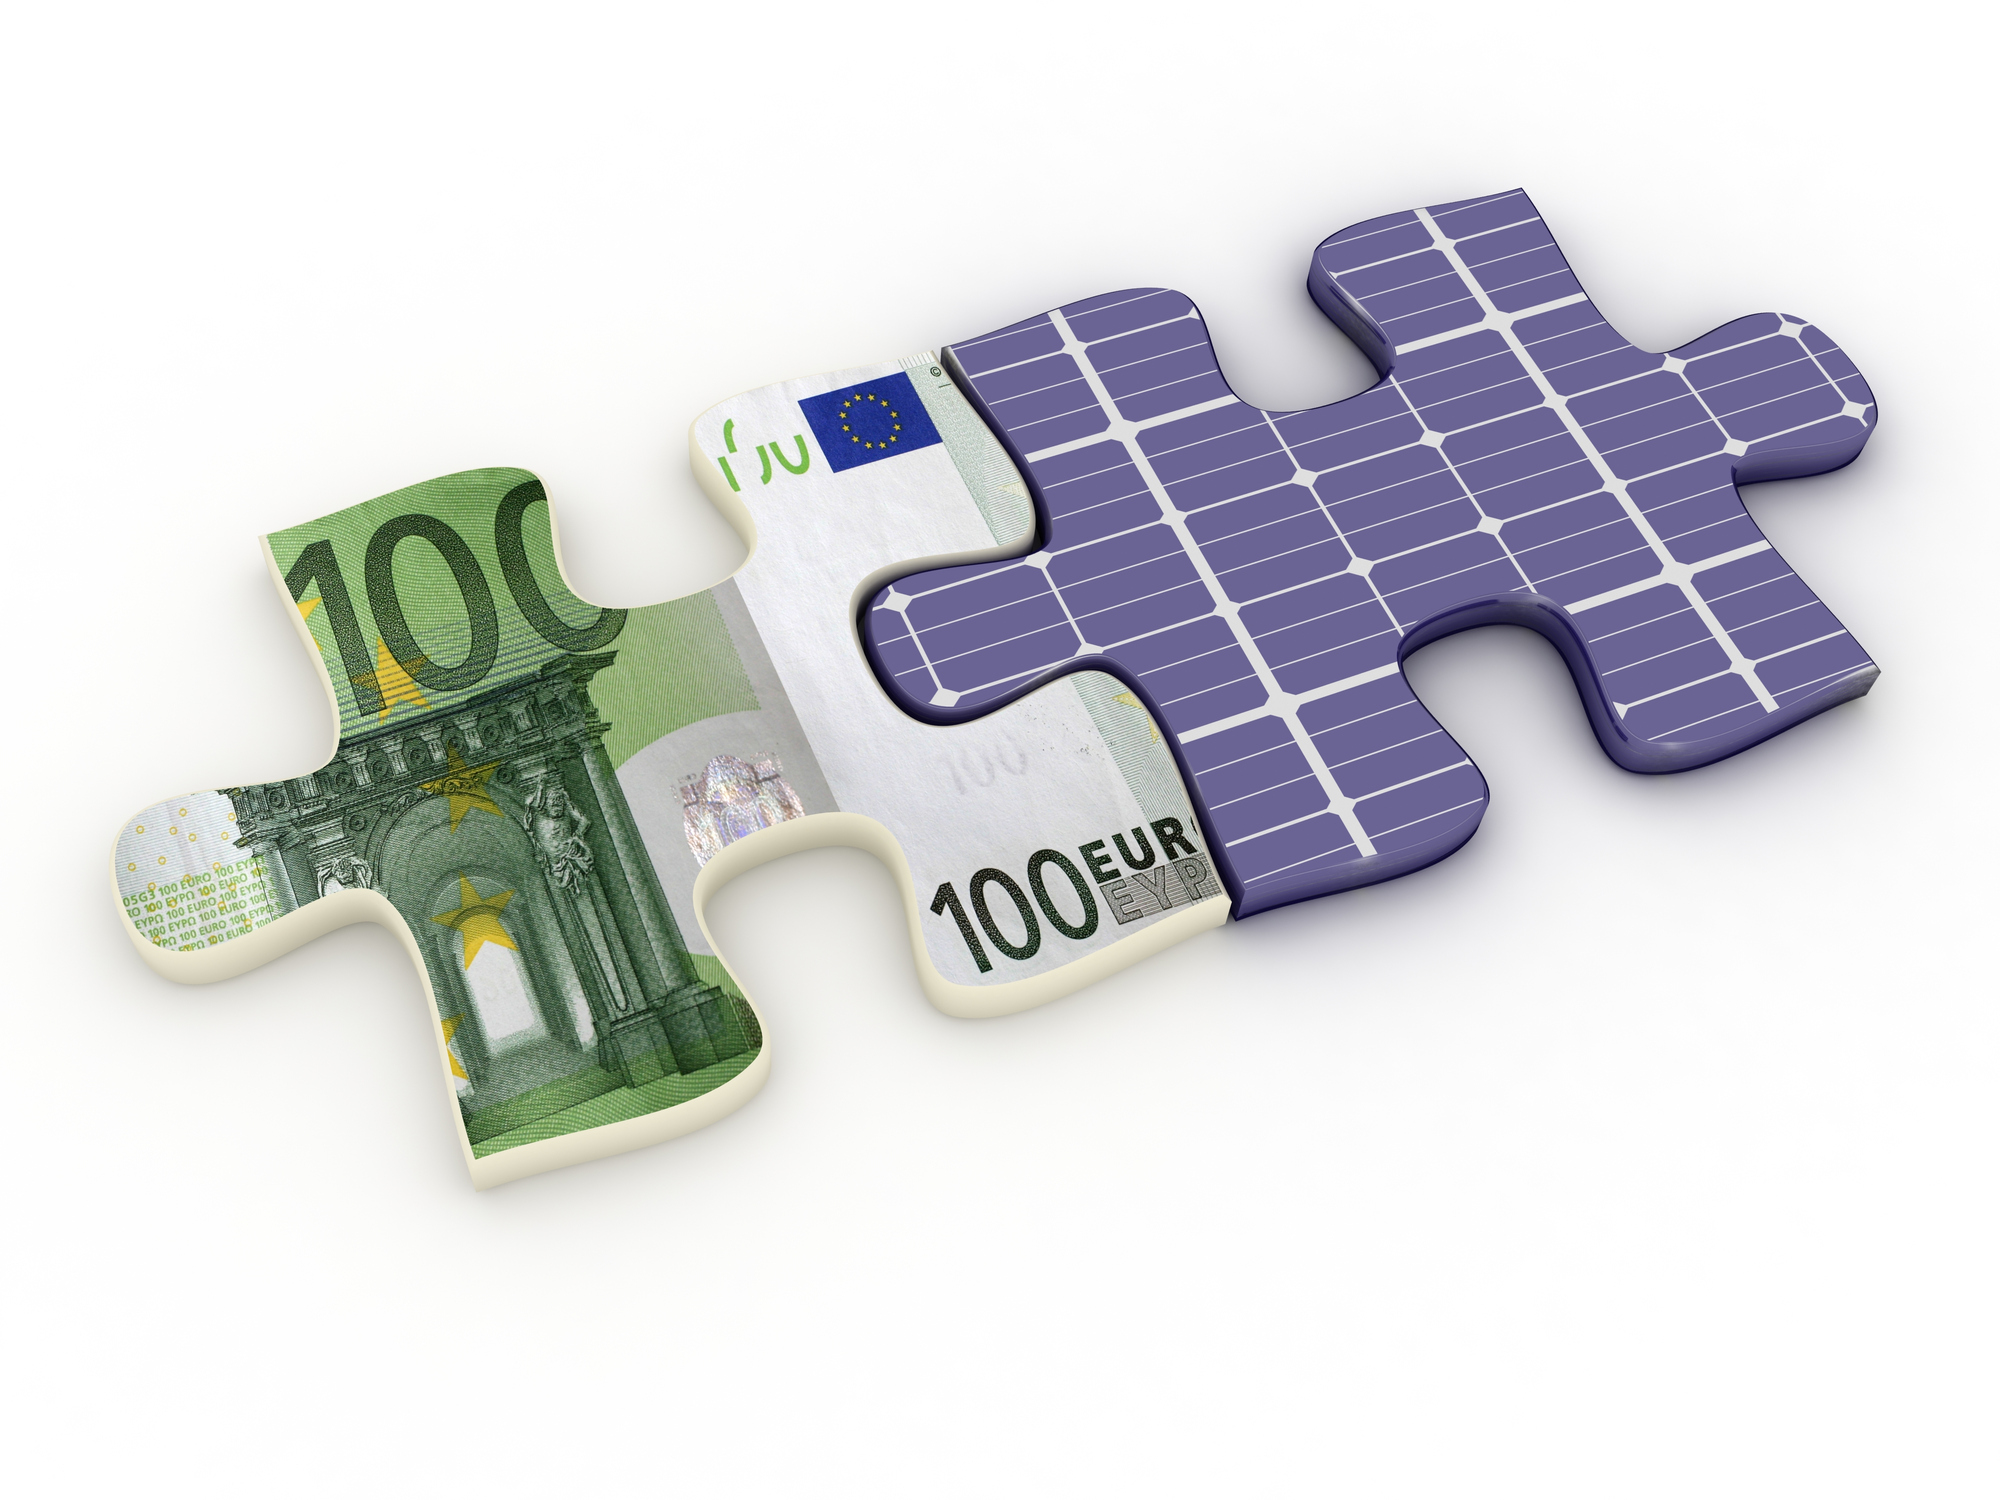 Cash and solar panels fitting together like pieces of a puzzle